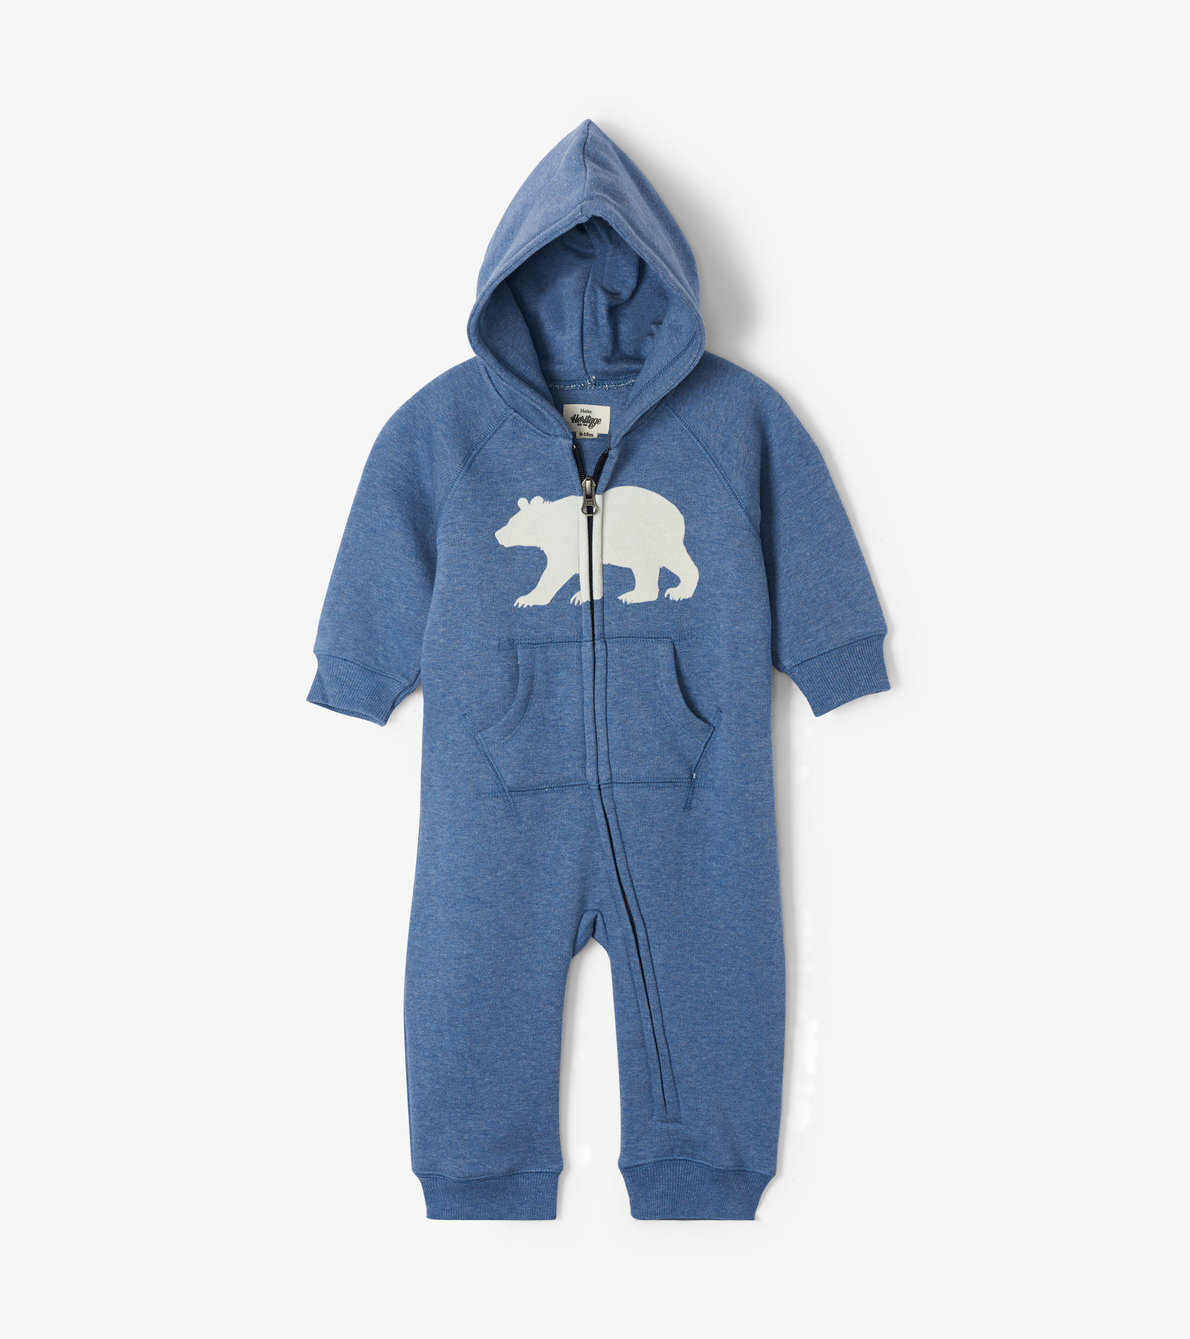 View larger image of Navy Bear Baby Heritage Hooded Romper